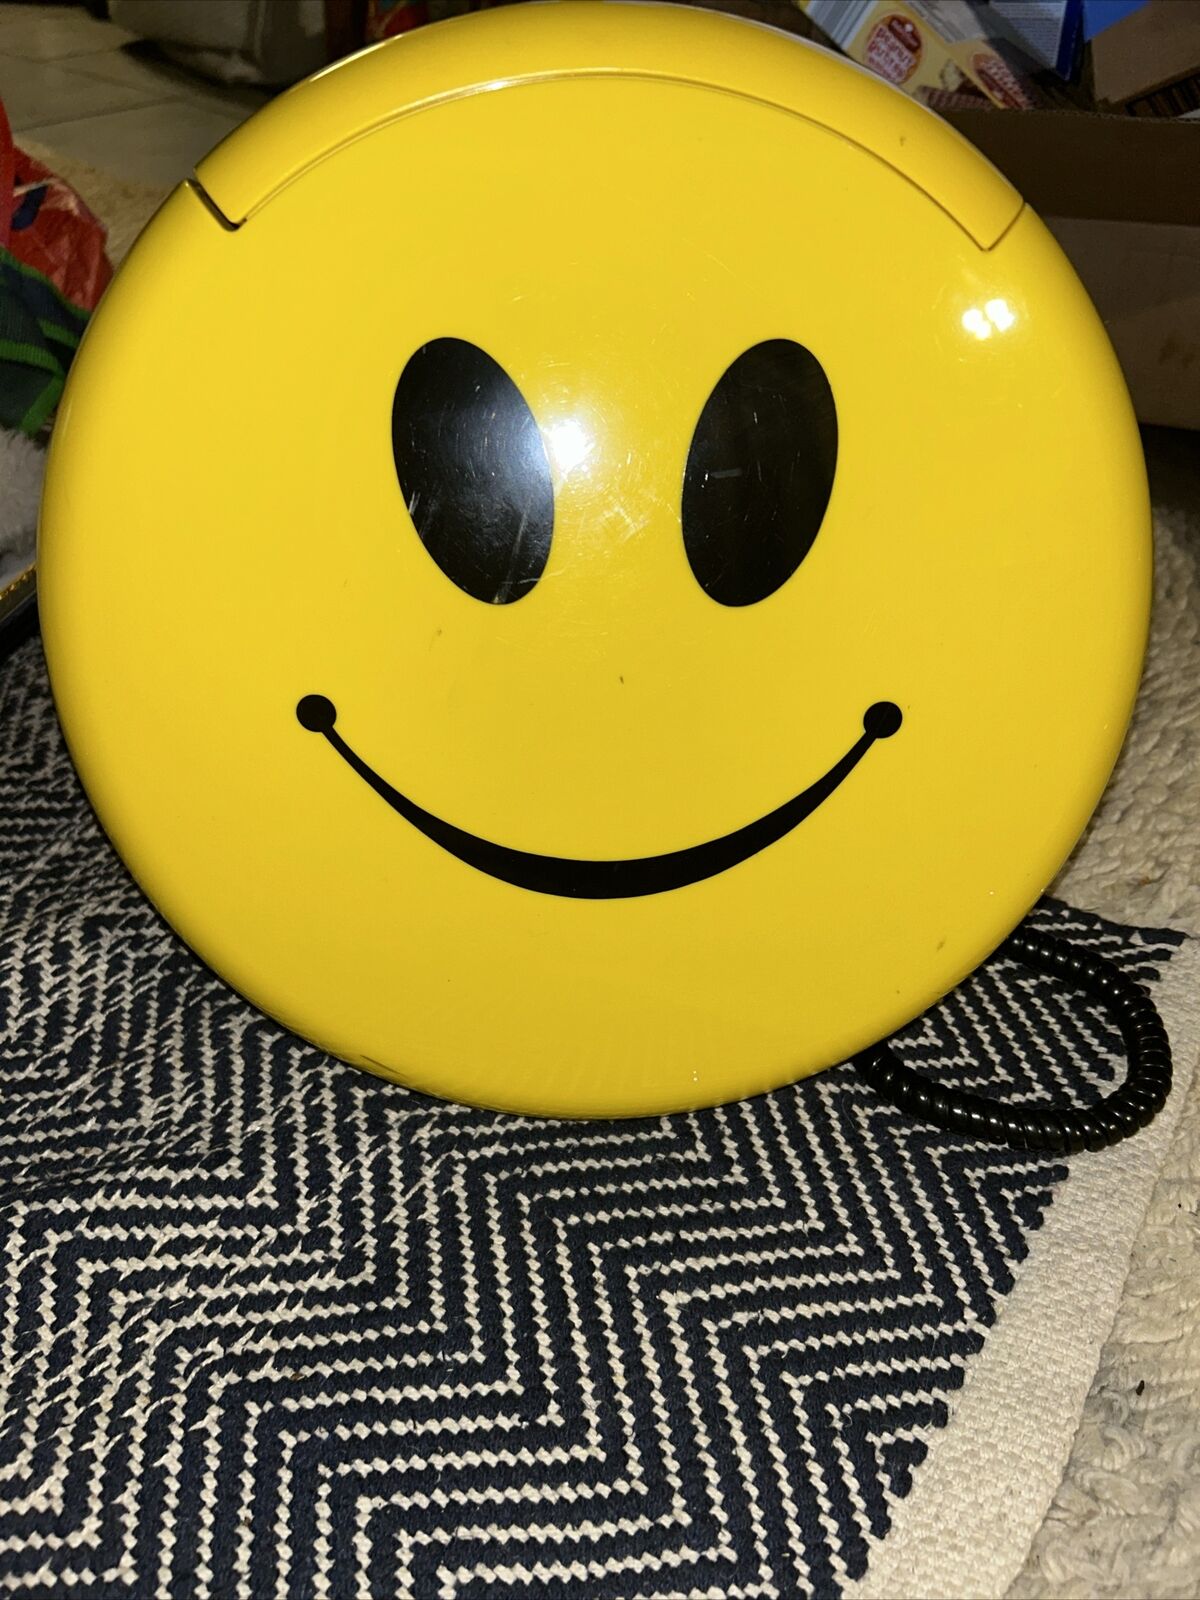 Vintage 1997 Smiley Face Telephone by TeleMania Longwood Industries Happy Phone